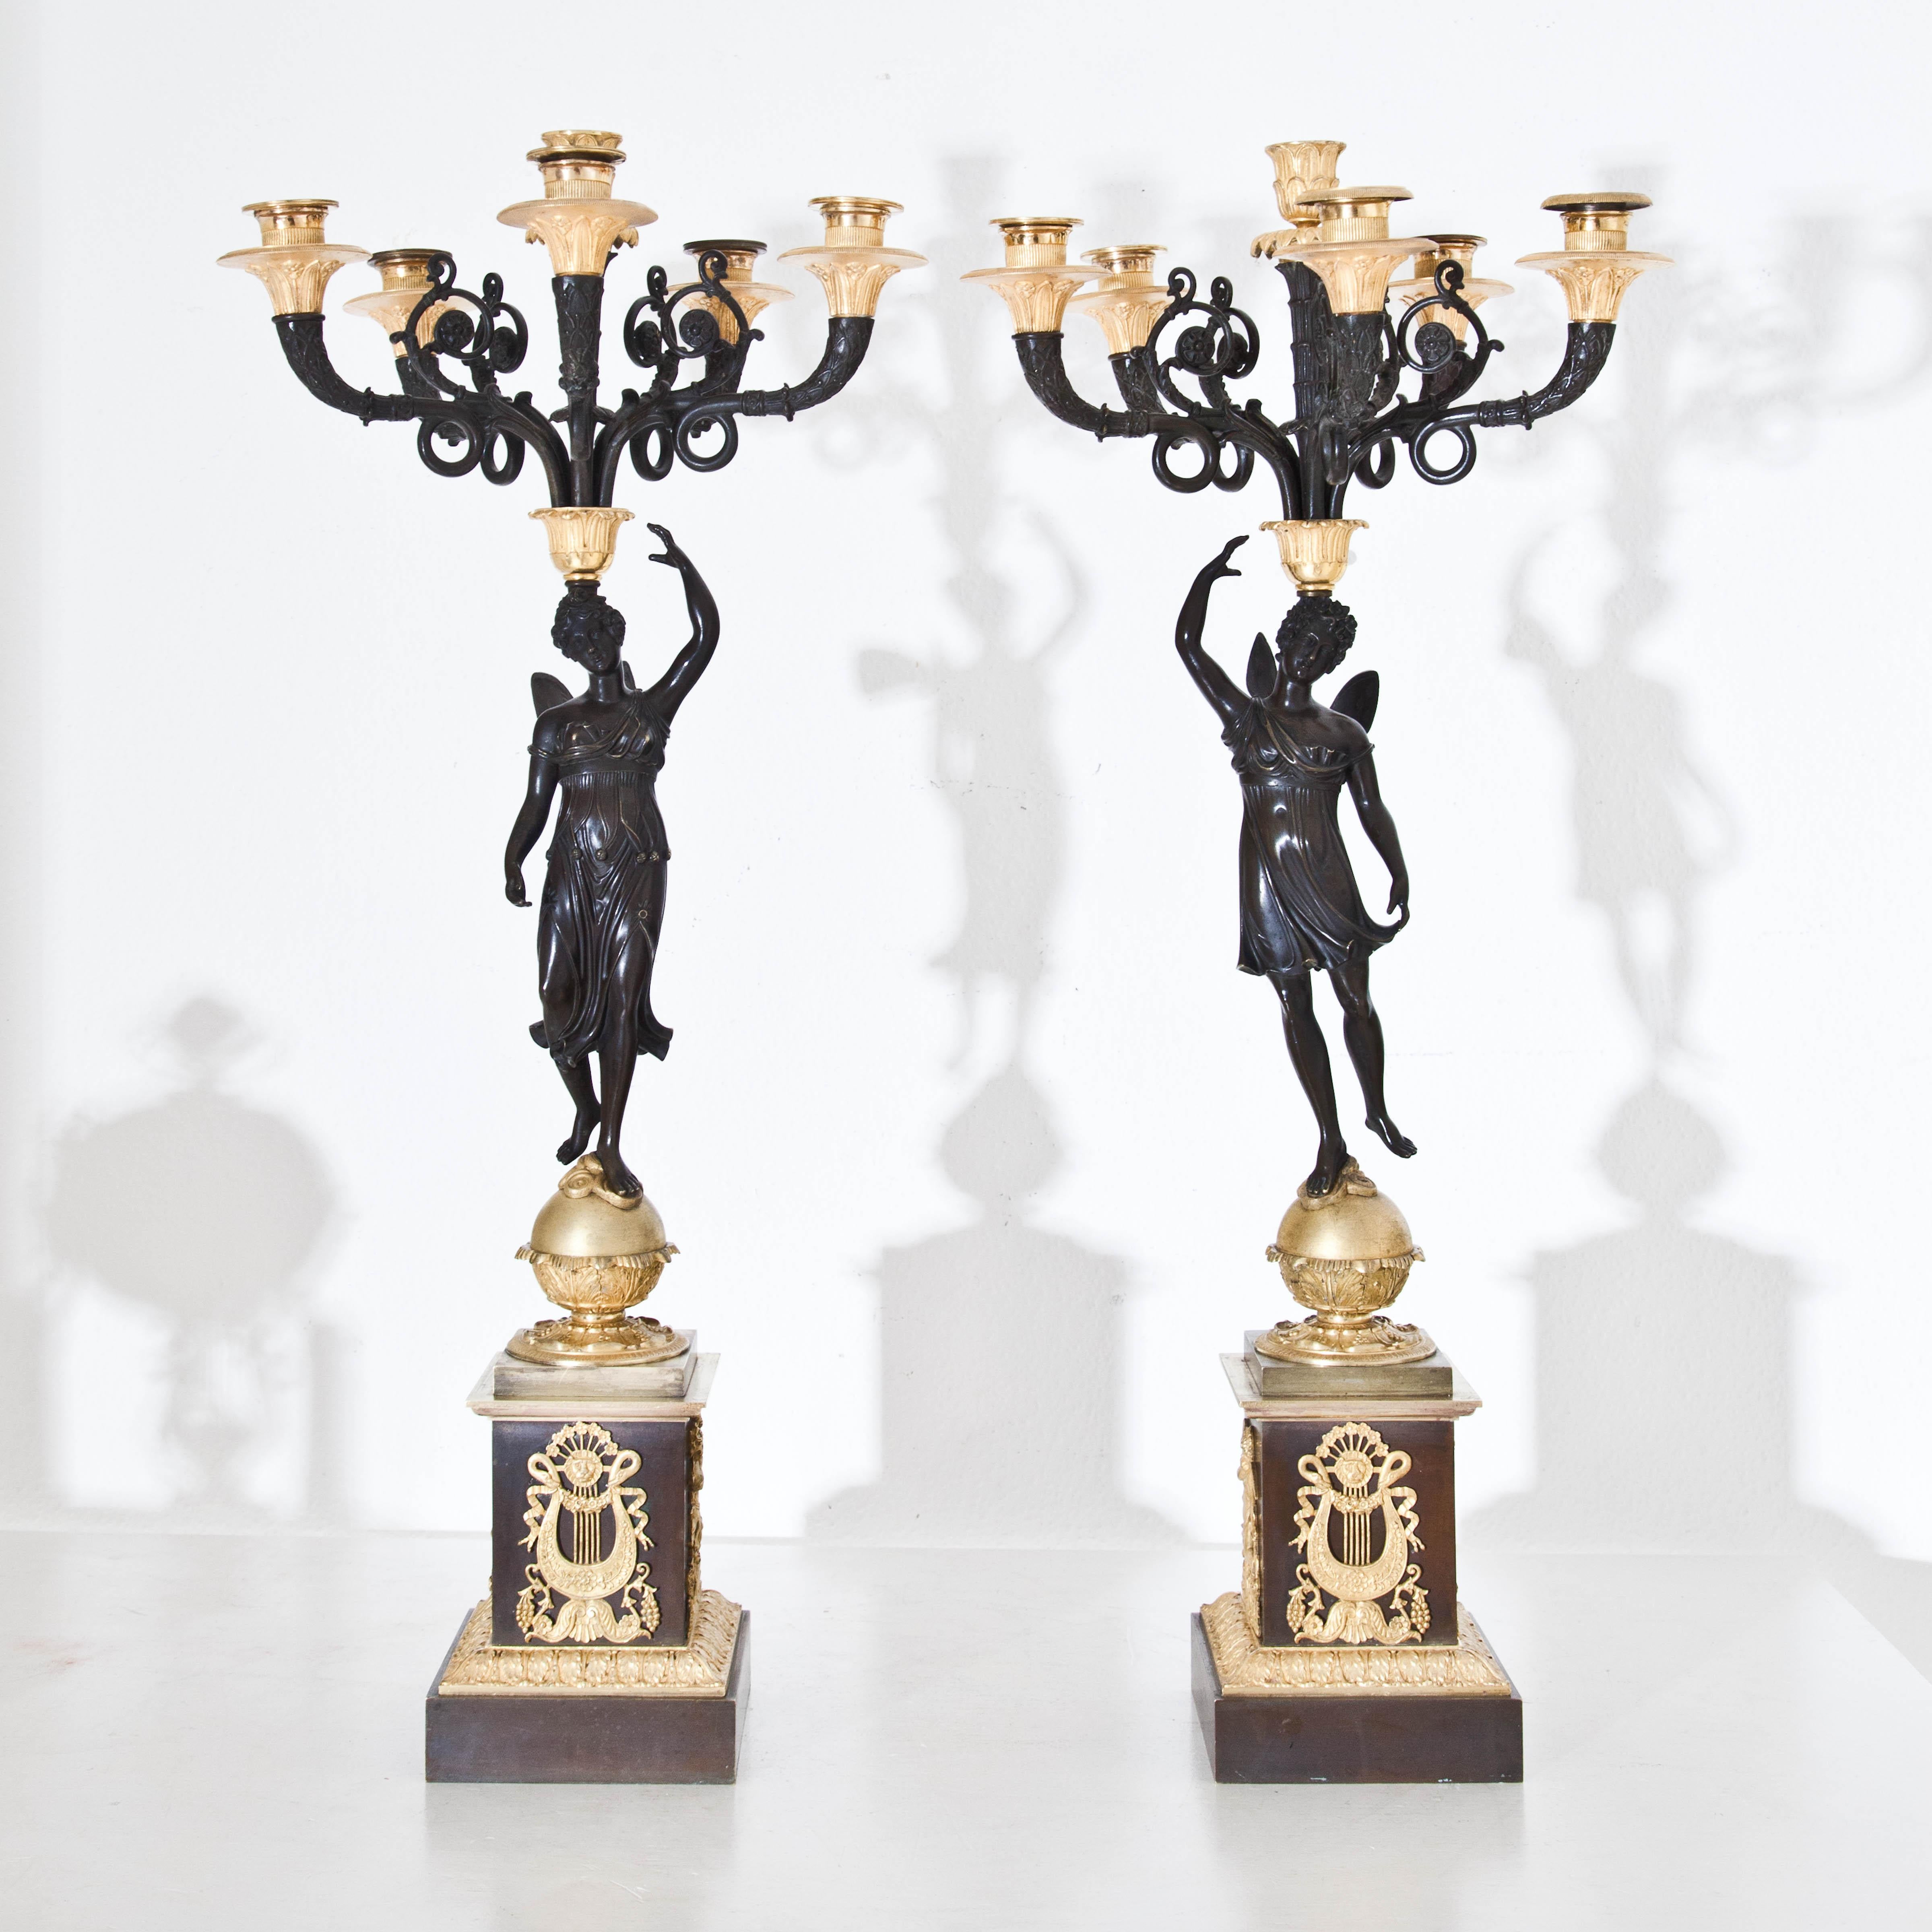 French Empire Candelabras, France, Early 19th Century